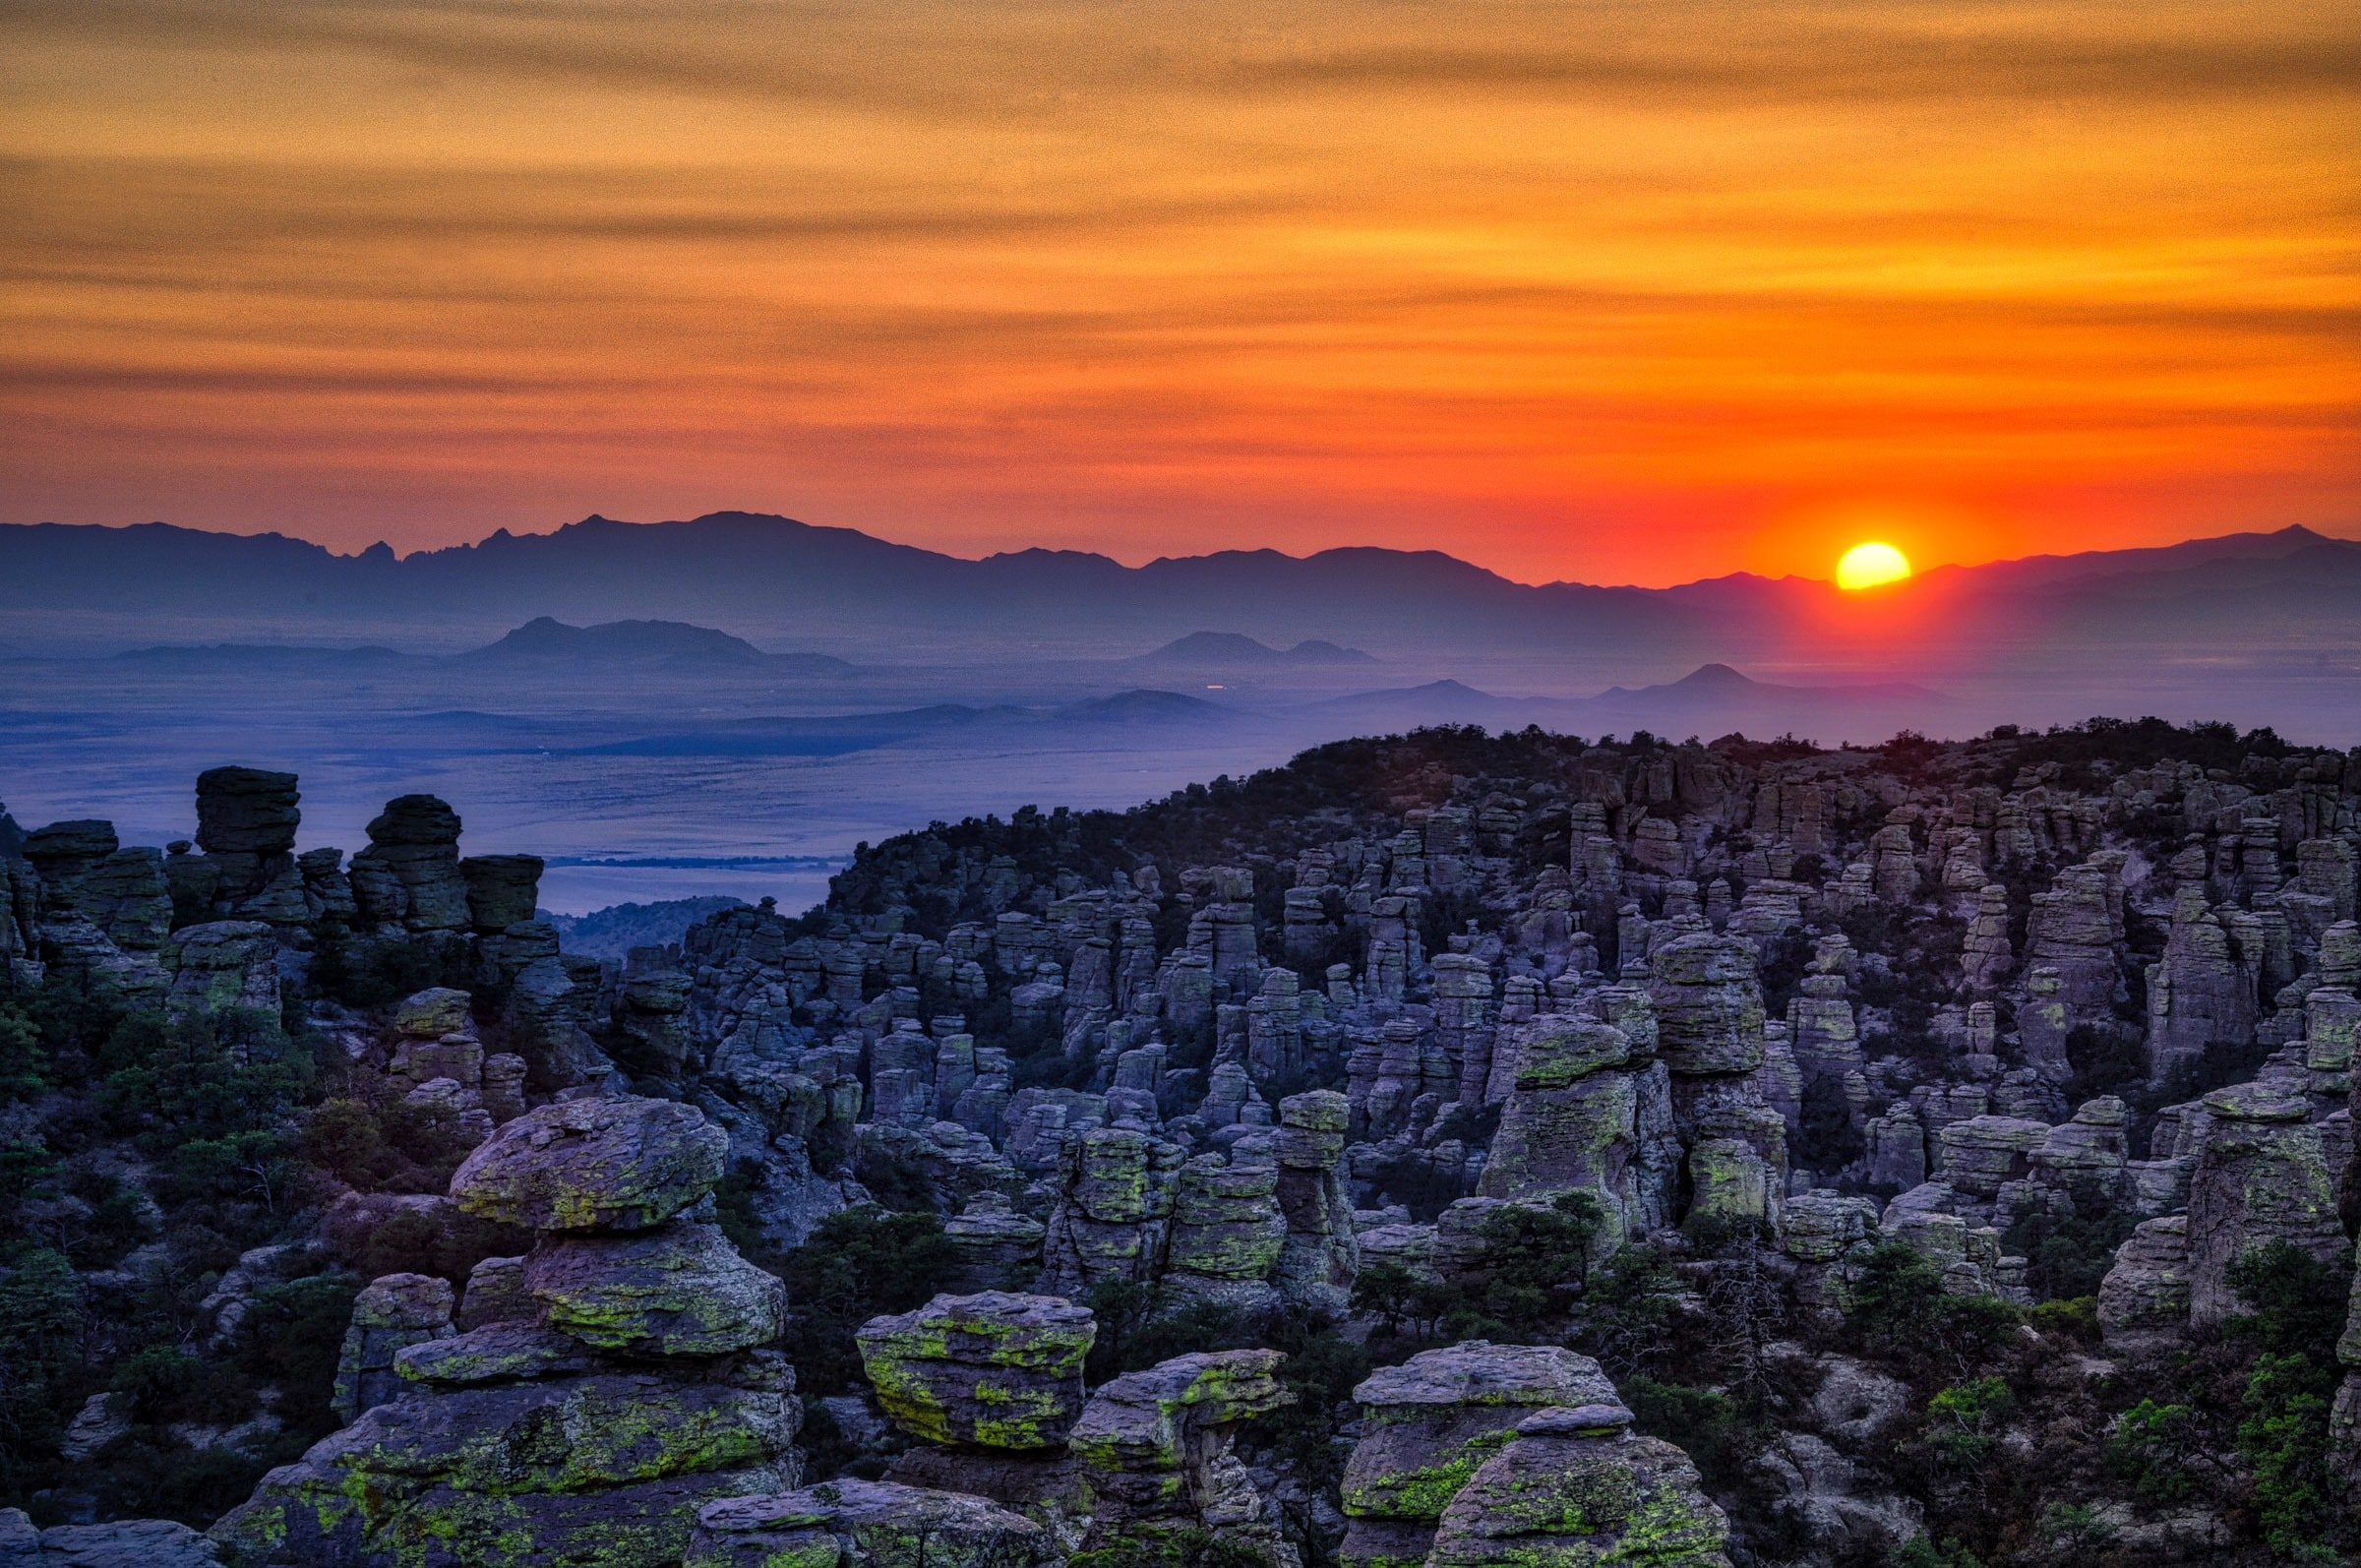 Sunset over Sulfur Springs Valley as seen from Massai Point in Chiricahua National Monument. In the middle distance is Rhyolite Canyon.